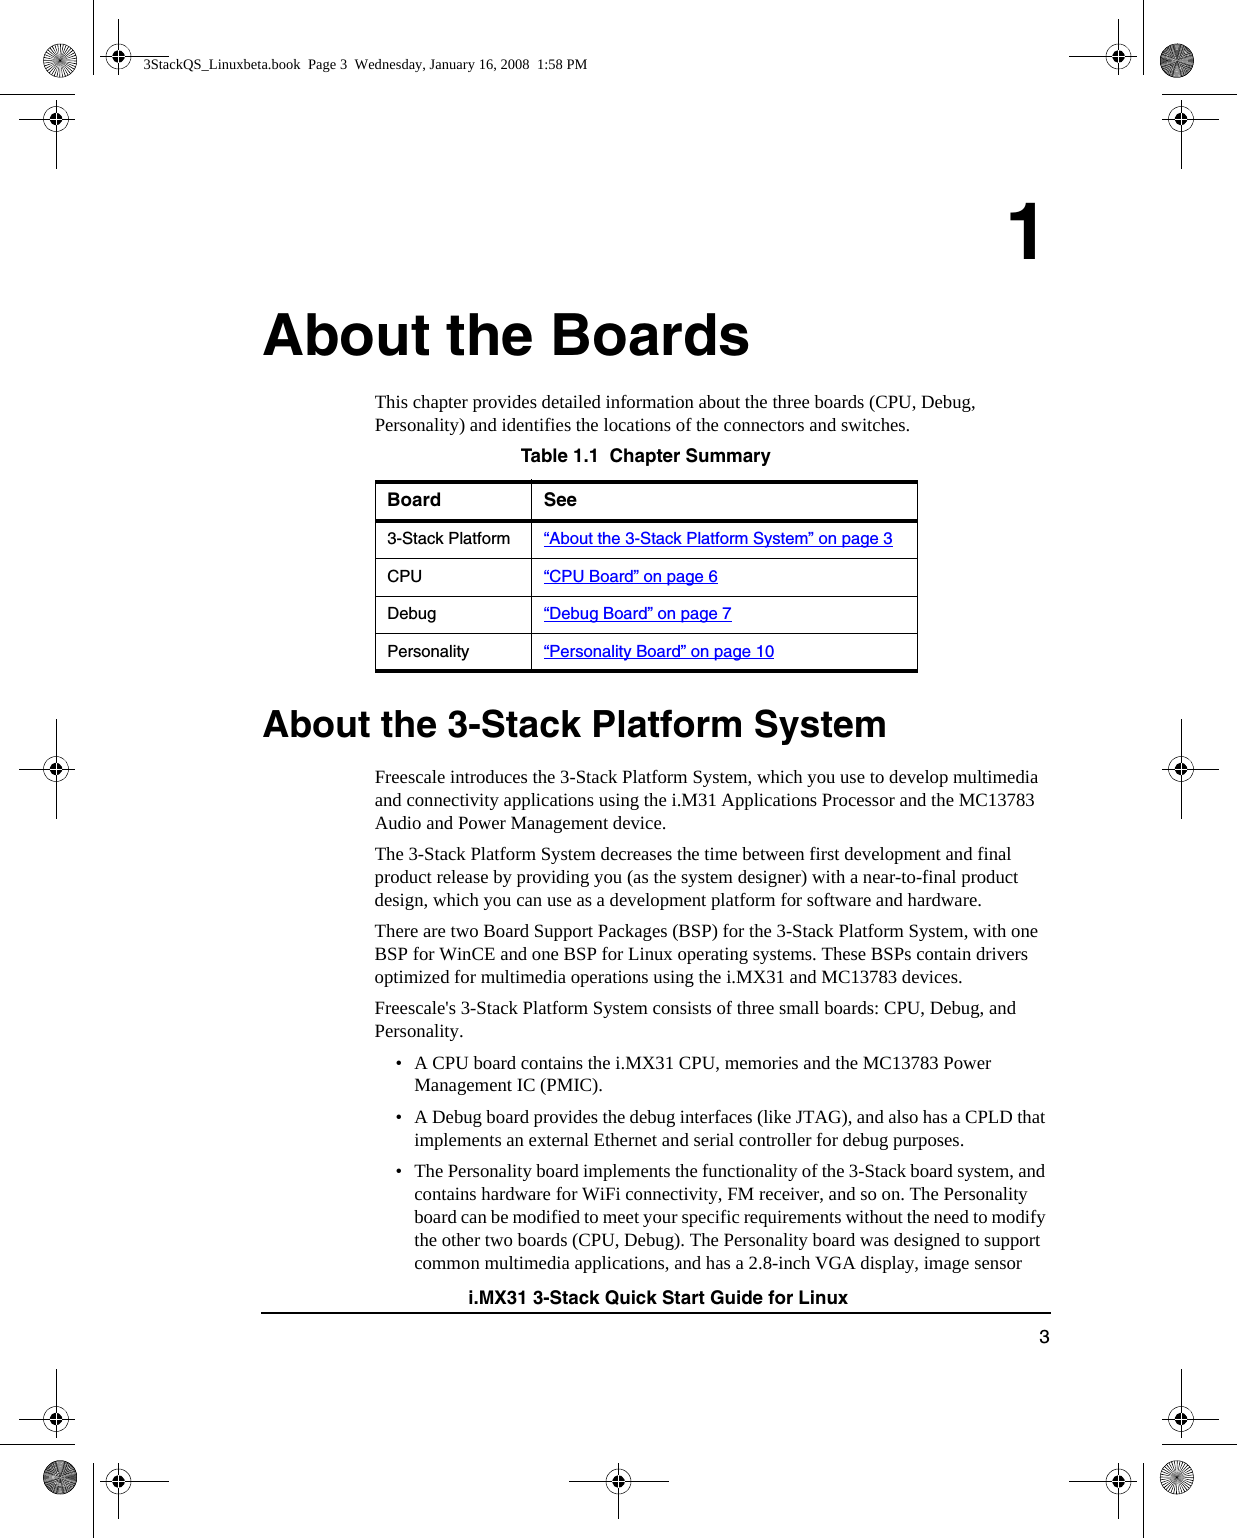 3i.MX31 3-Stack Quick Start Guide for Linux1About the BoardsThis chapter provides detailed information about the three boards (CPU, Debug, Personality) and identifies the locations of the connectors and switches. About the 3-Stack Platform SystemFreescale introduces the 3-Stack Platform System, which you use to develop multimedia and connectivity applications using the i.M31 Applications Processor and the MC13783 Audio and Power Management device. The 3-Stack Platform System decreases the time between first development and final product release by providing you (as the system designer) with a near-to-final product design, which you can use as a development platform for software and hardware.There are two Board Support Packages (BSP) for the 3-Stack Platform System, with one BSP for WinCE and one BSP for Linux operating systems. These BSPs contain drivers optimized for multimedia operations using the i.MX31 and MC13783 devices.Freescale&apos;s 3-Stack Platform System consists of three small boards: CPU, Debug, and Personality. • A CPU board contains the i.MX31 CPU, memories and the MC13783 Power Management IC (PMIC). • A Debug board provides the debug interfaces (like JTAG), and also has a CPLD that implements an external Ethernet and serial controller for debug purposes. • The Personality board implements the functionality of the 3-Stack board system, and contains hardware for WiFi connectivity, FM receiver, and so on. The Personality board can be modified to meet your specific requirements without the need to modify the other two boards (CPU, Debug). The Personality board was designed to support common multimedia applications, and has a 2.8-inch VGA display, image sensor Table 1.1  Chapter SummaryBoard See3-Stack Platform “About the 3-Stack Platform System” on page 3CPU “CPU Board” on page 6Debug “Debug Board” on page 7Personality “Personality Board” on page 103StackQS_Linuxbeta.book  Page 3  Wednesday, January 16, 2008  1:58 PM